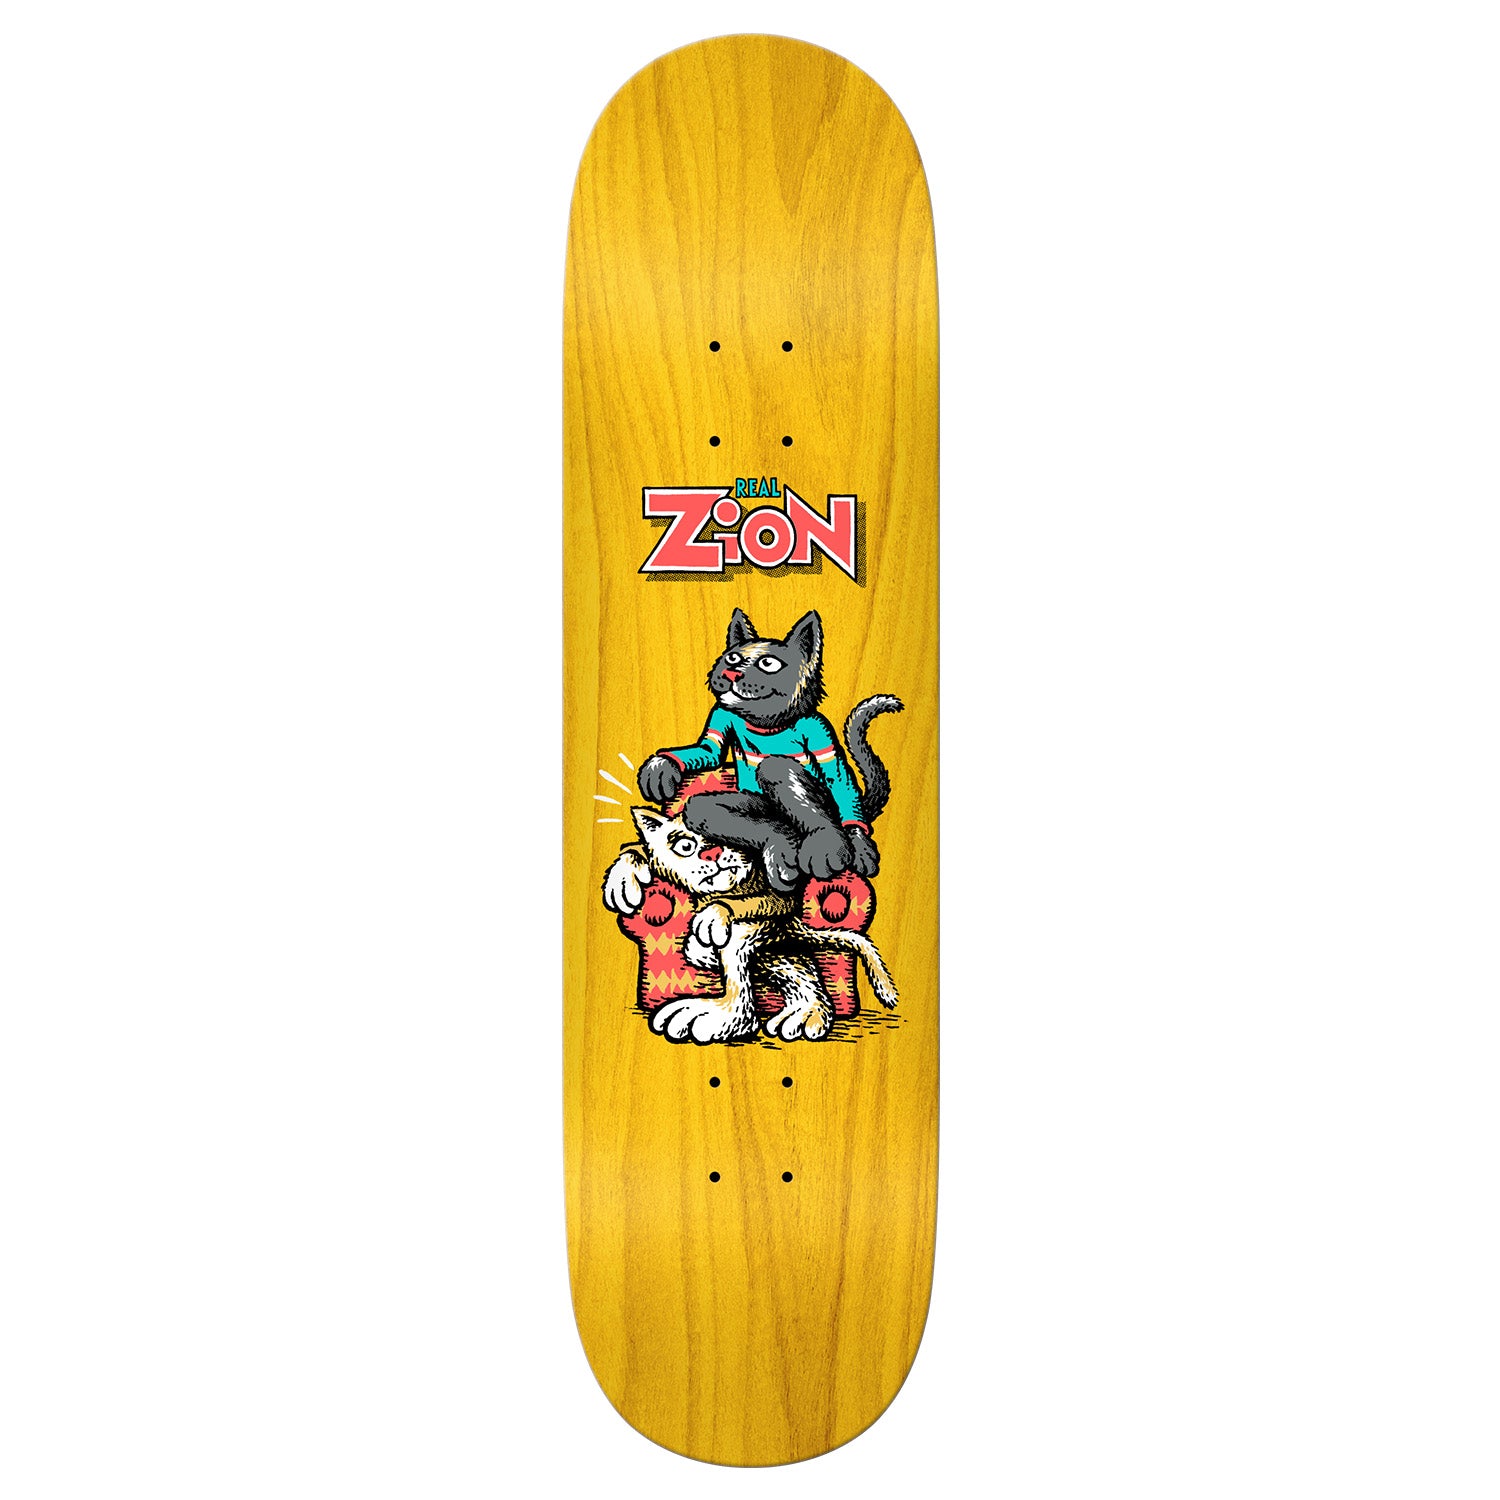 Real Zion Comix Deck Full SE 8.06"